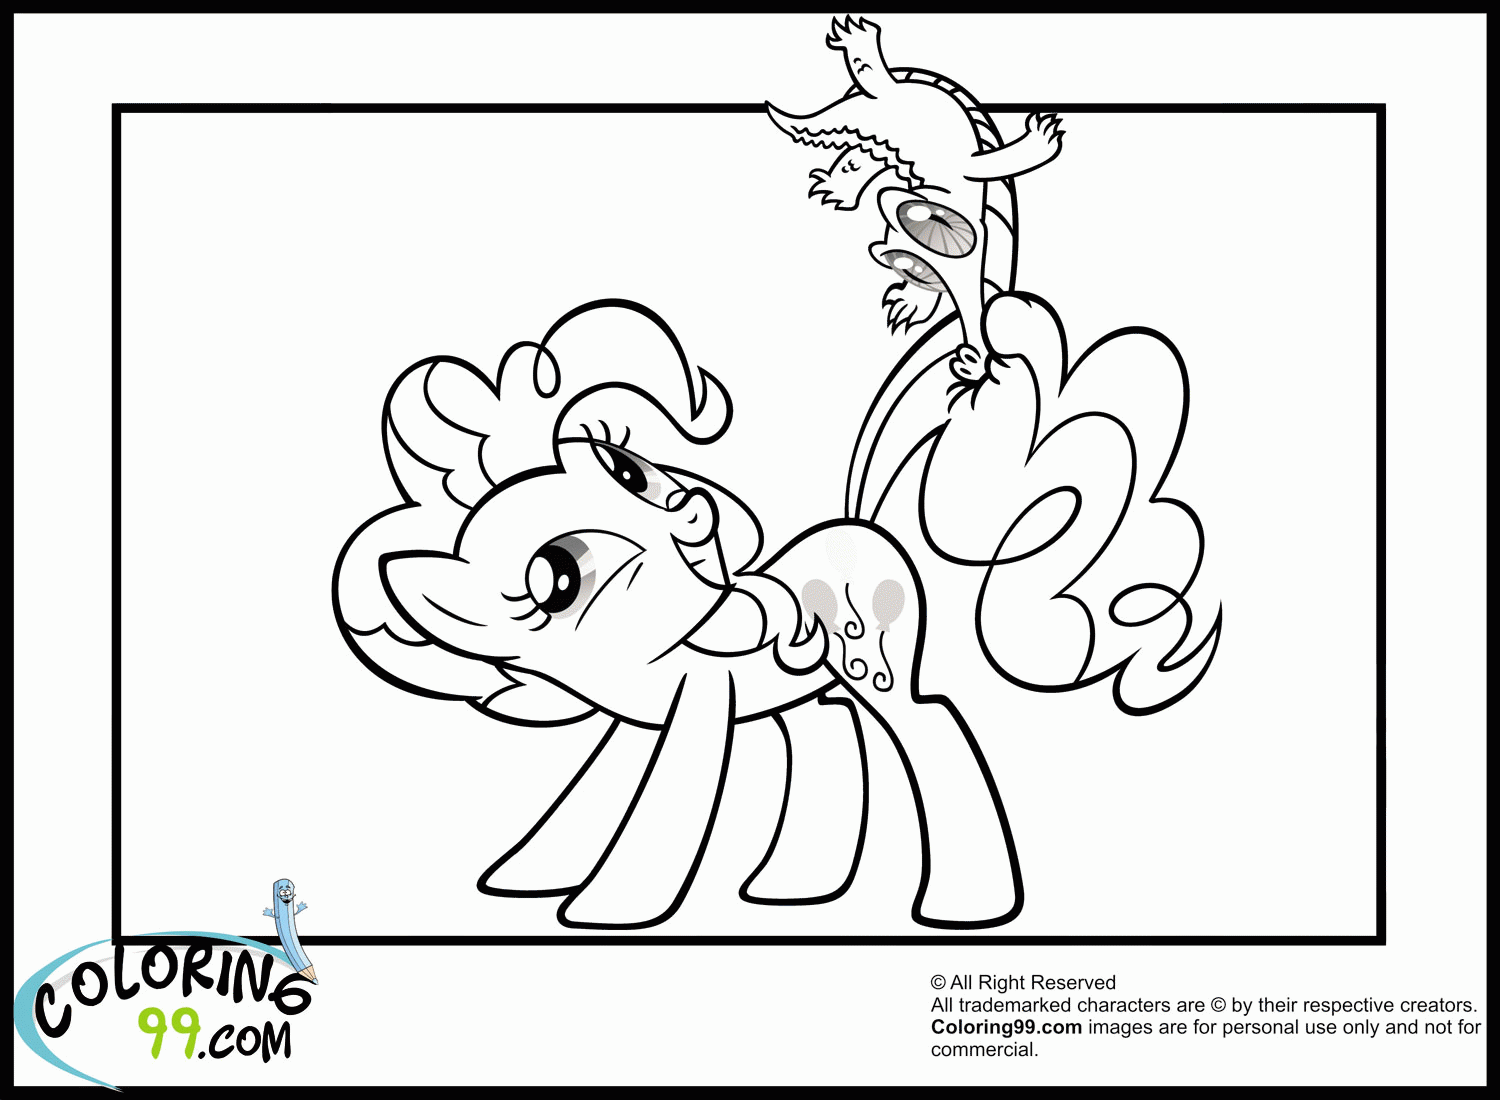 Pinkie Pie - Coloring Pages for Kids and for Adults